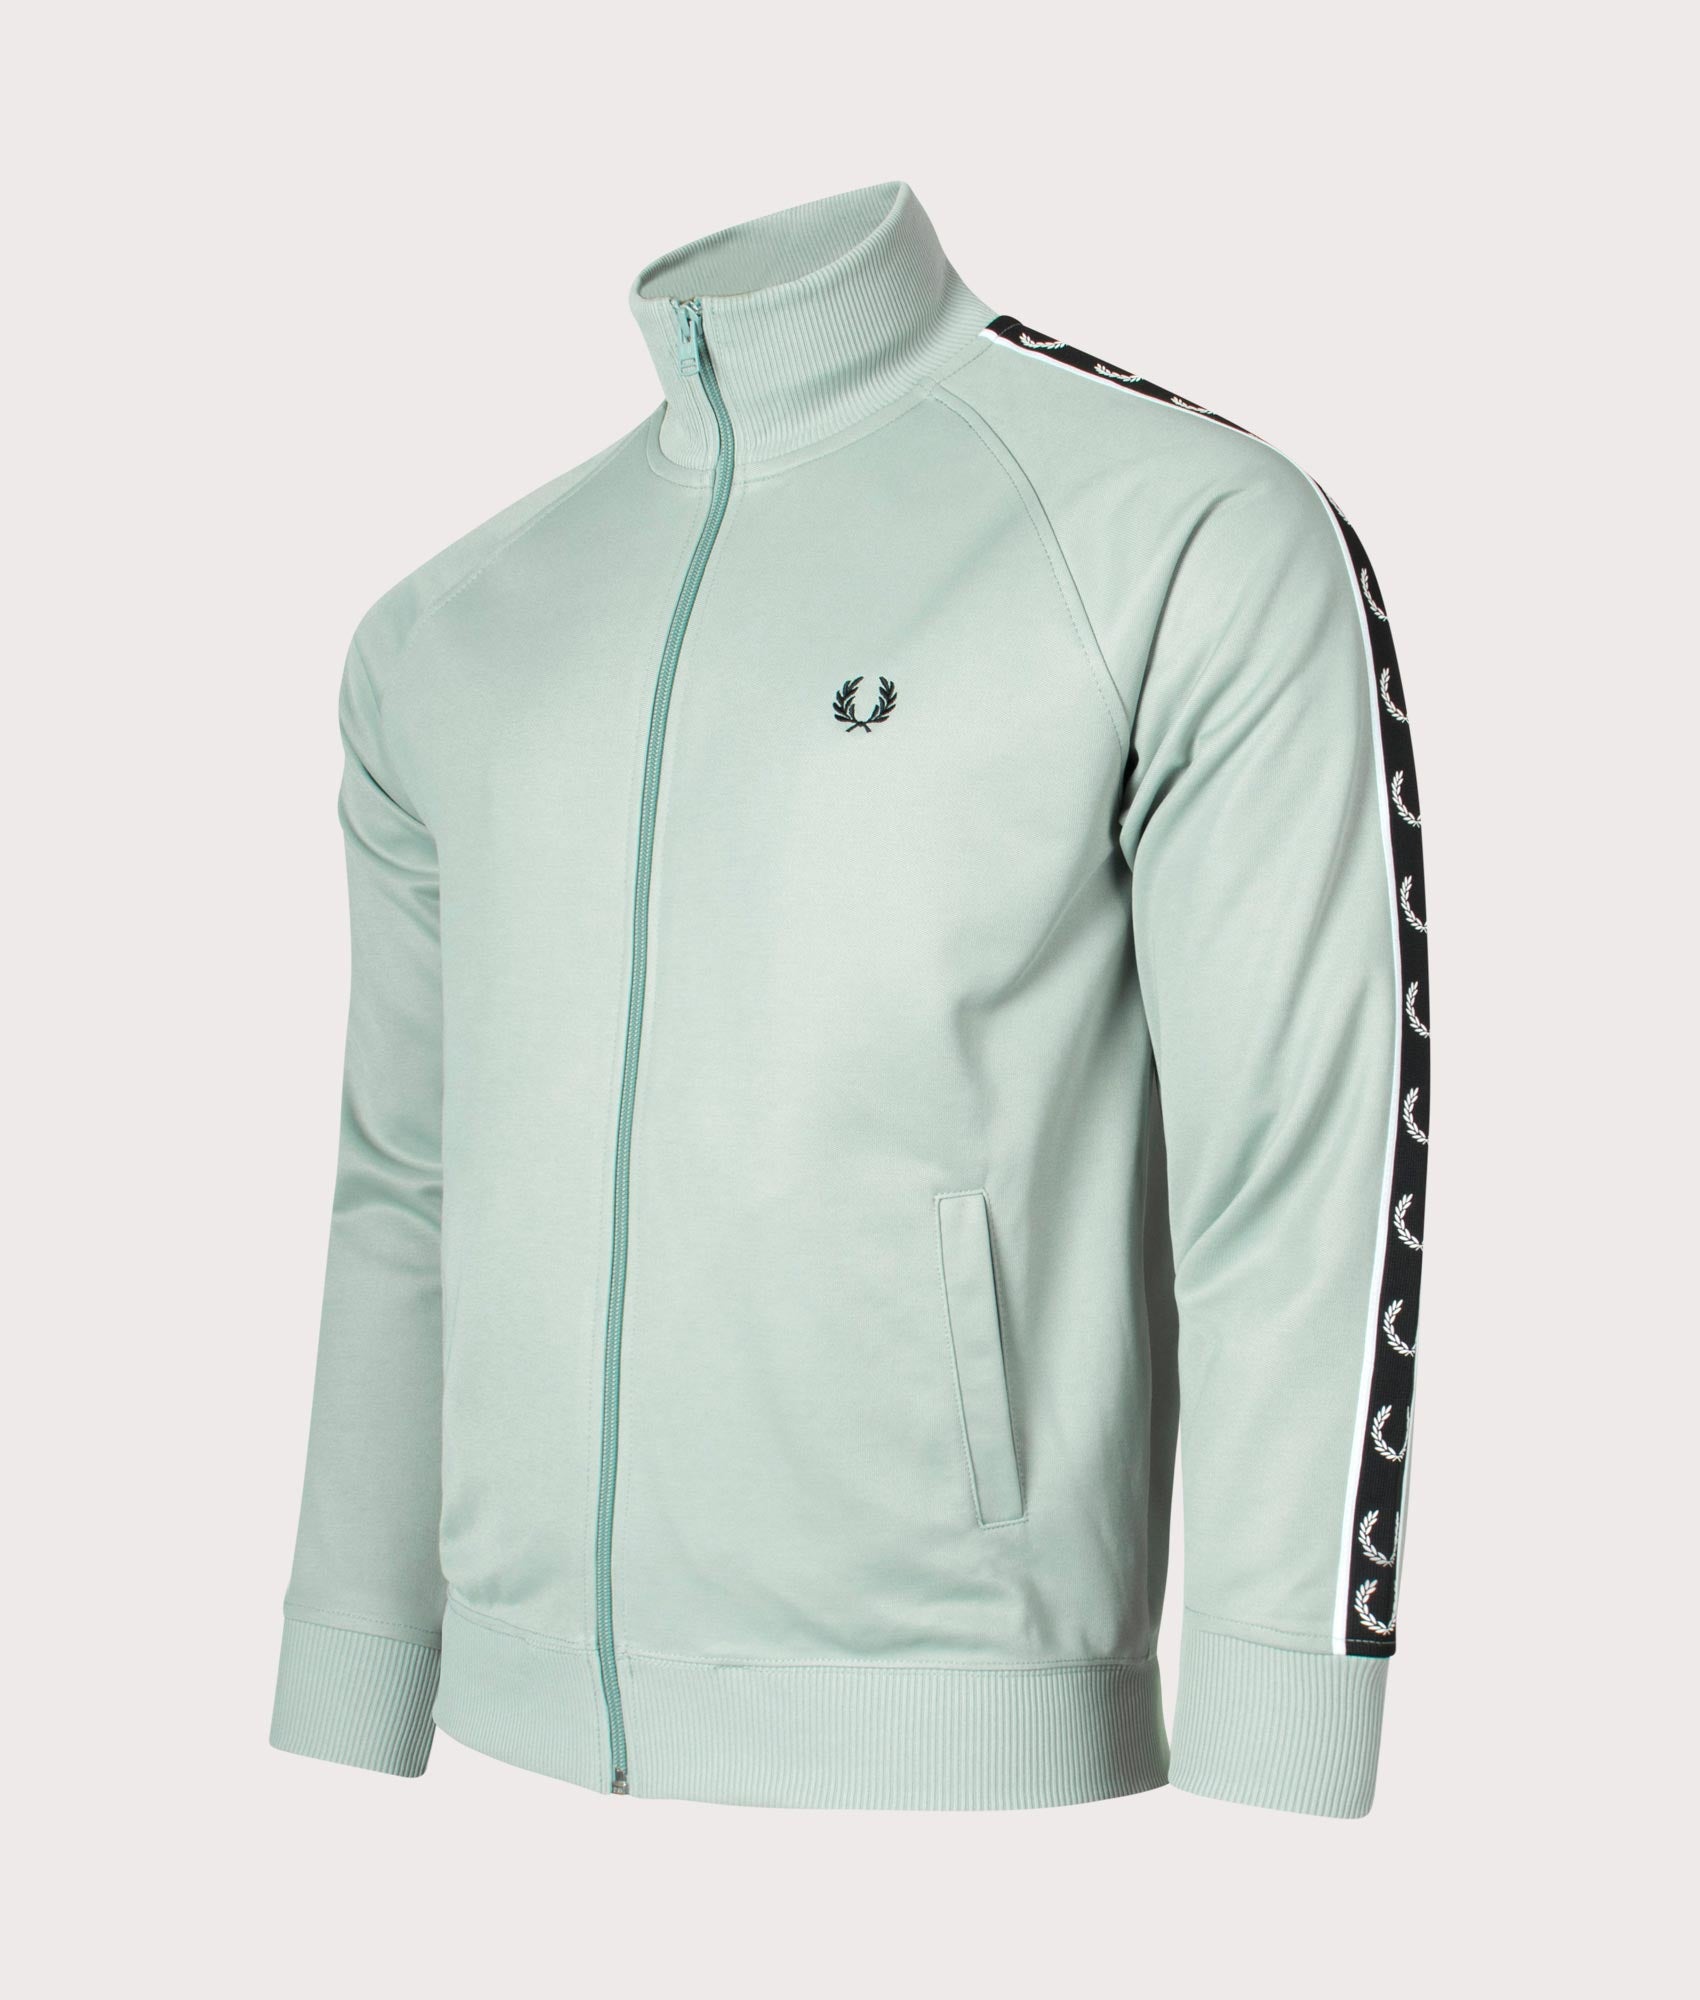 Fall Trends: The Best Track Jackets to Wear This Season